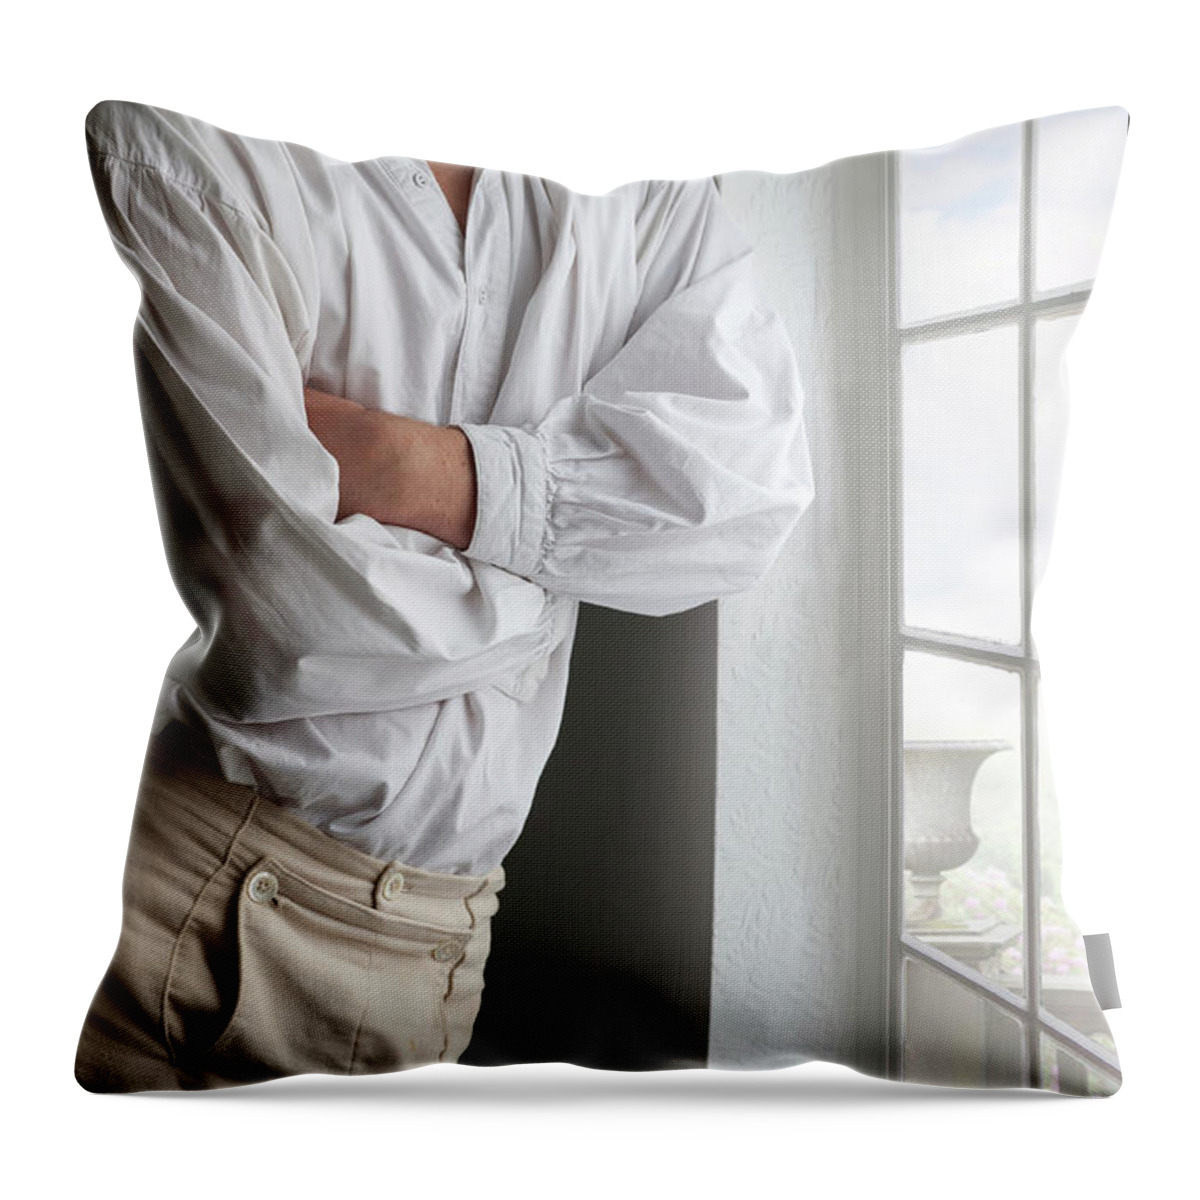 Regency Throw Pillow featuring the photograph Man In Historical Shirt And Breeches by Lee Avison